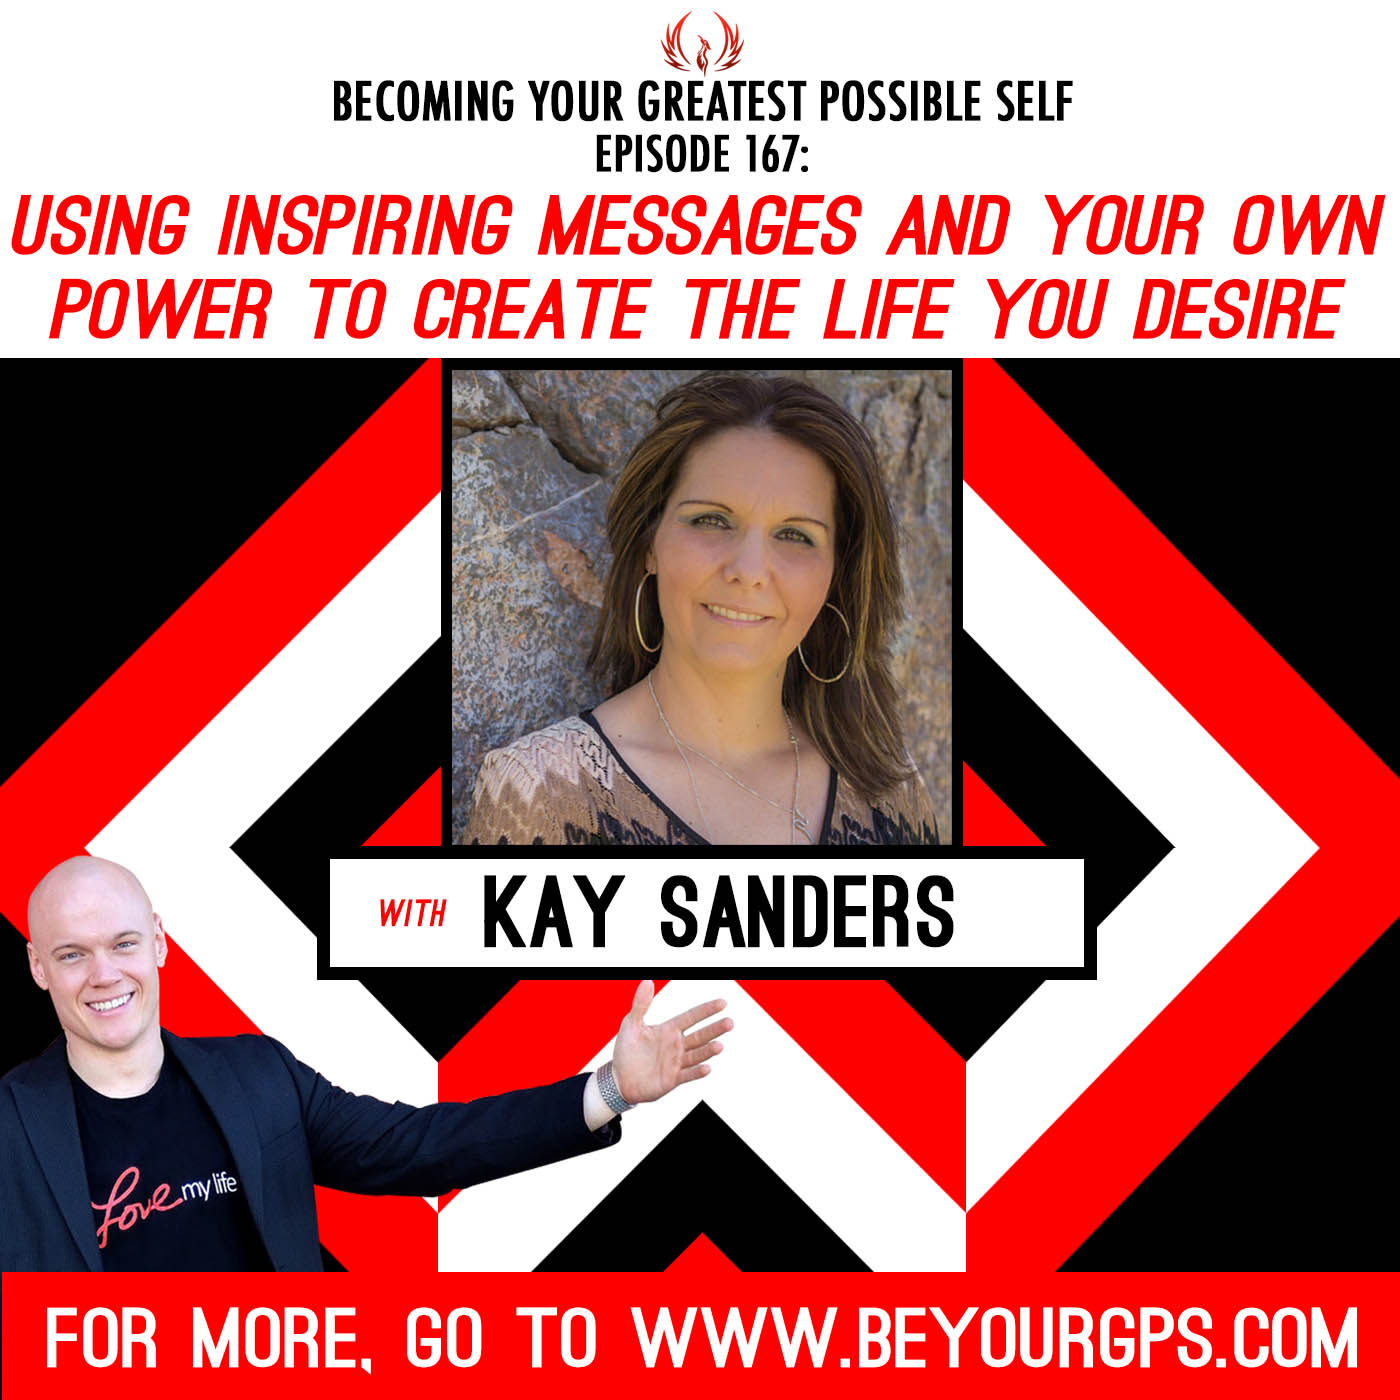 Using Inspiring Messages and Your Own Power to Create the Life You Desire with Kay Sanders